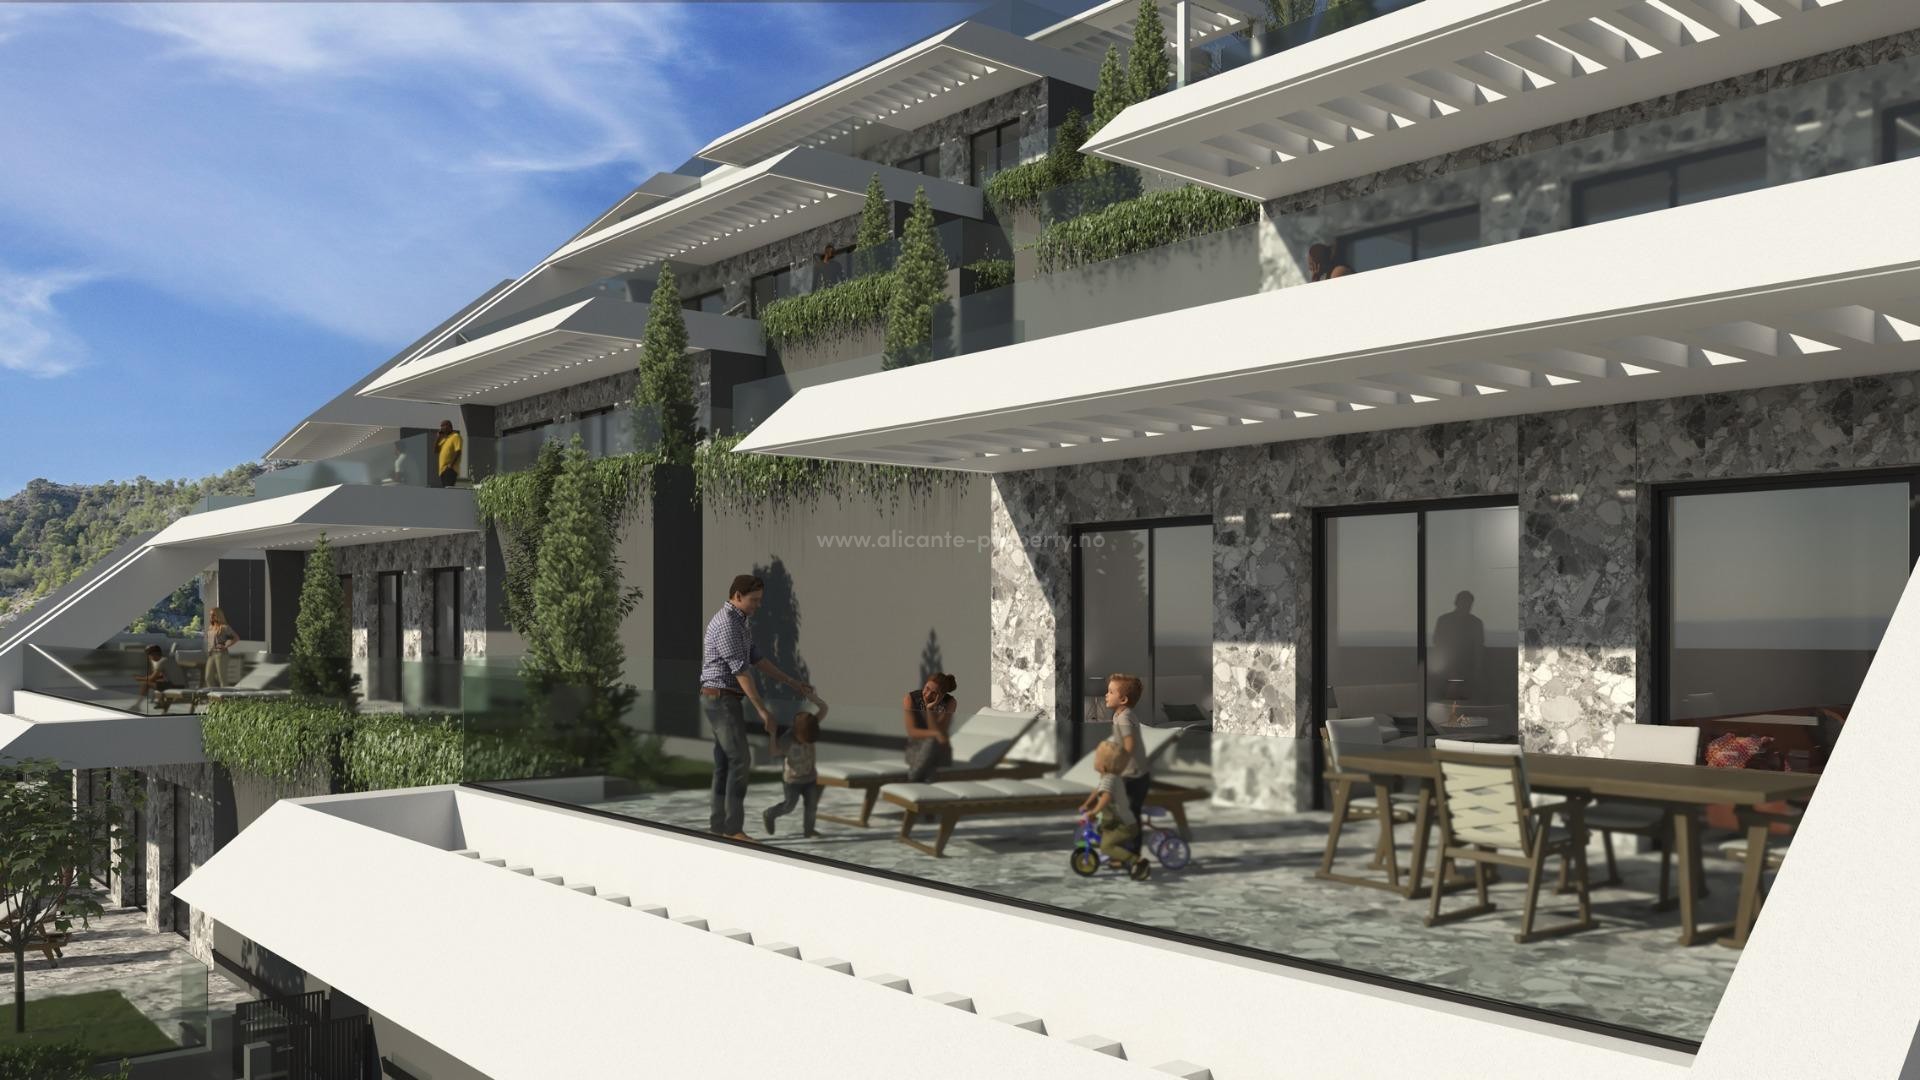 New exclusive residential complex in Finestrat with modern apartments/penthouses, 2 bedrooms, 2 bathrooms, great communal swimming pool, parking spaces